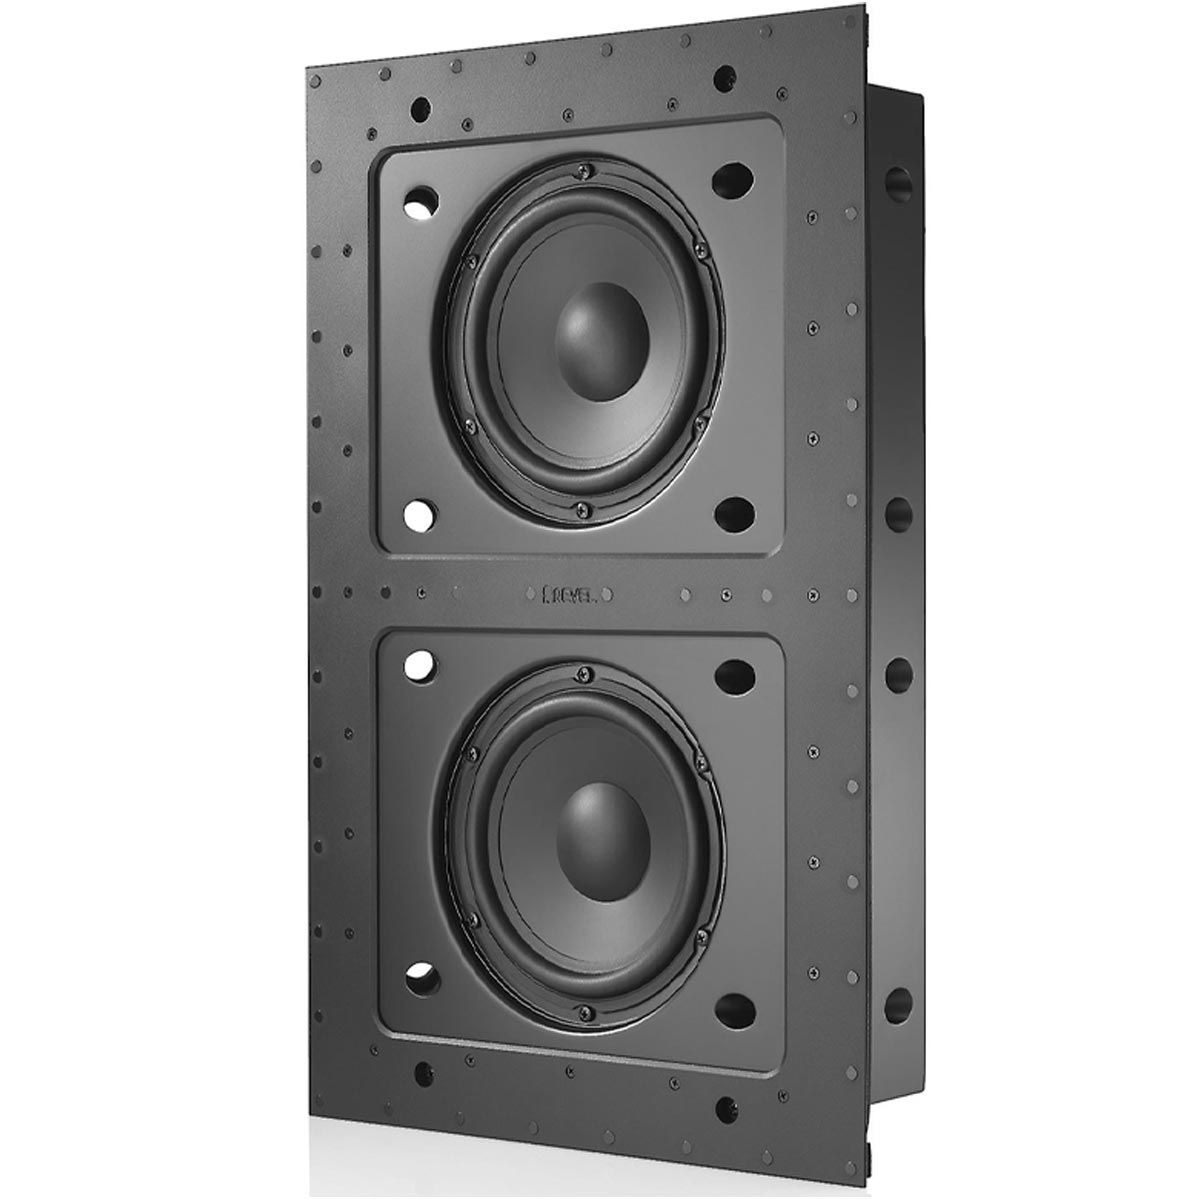 Revel B28W Architectural In-Wall Subwoofer - angled front view without grille